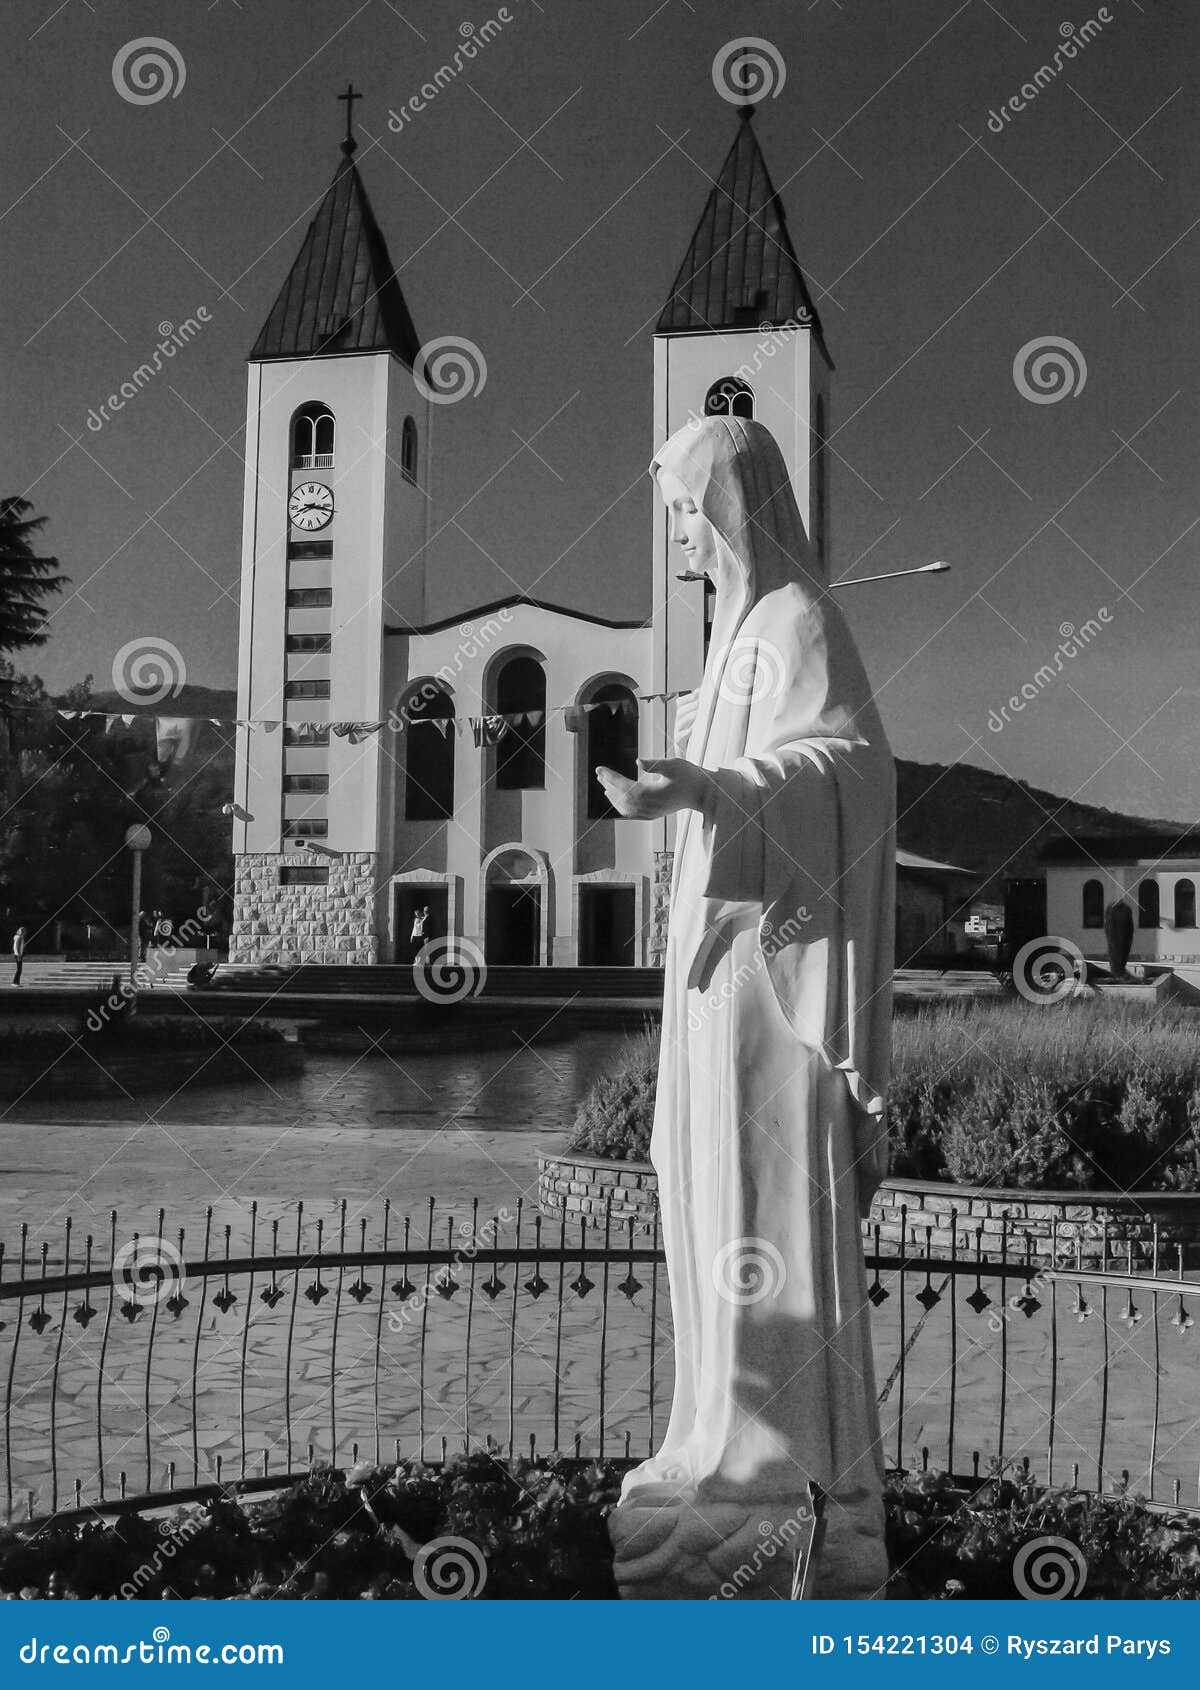 Church And Statue Of Madonna In Medjugorje A Place Of Pilgrimage From All Over The World Stock Photo Image Of Bosnia Mother